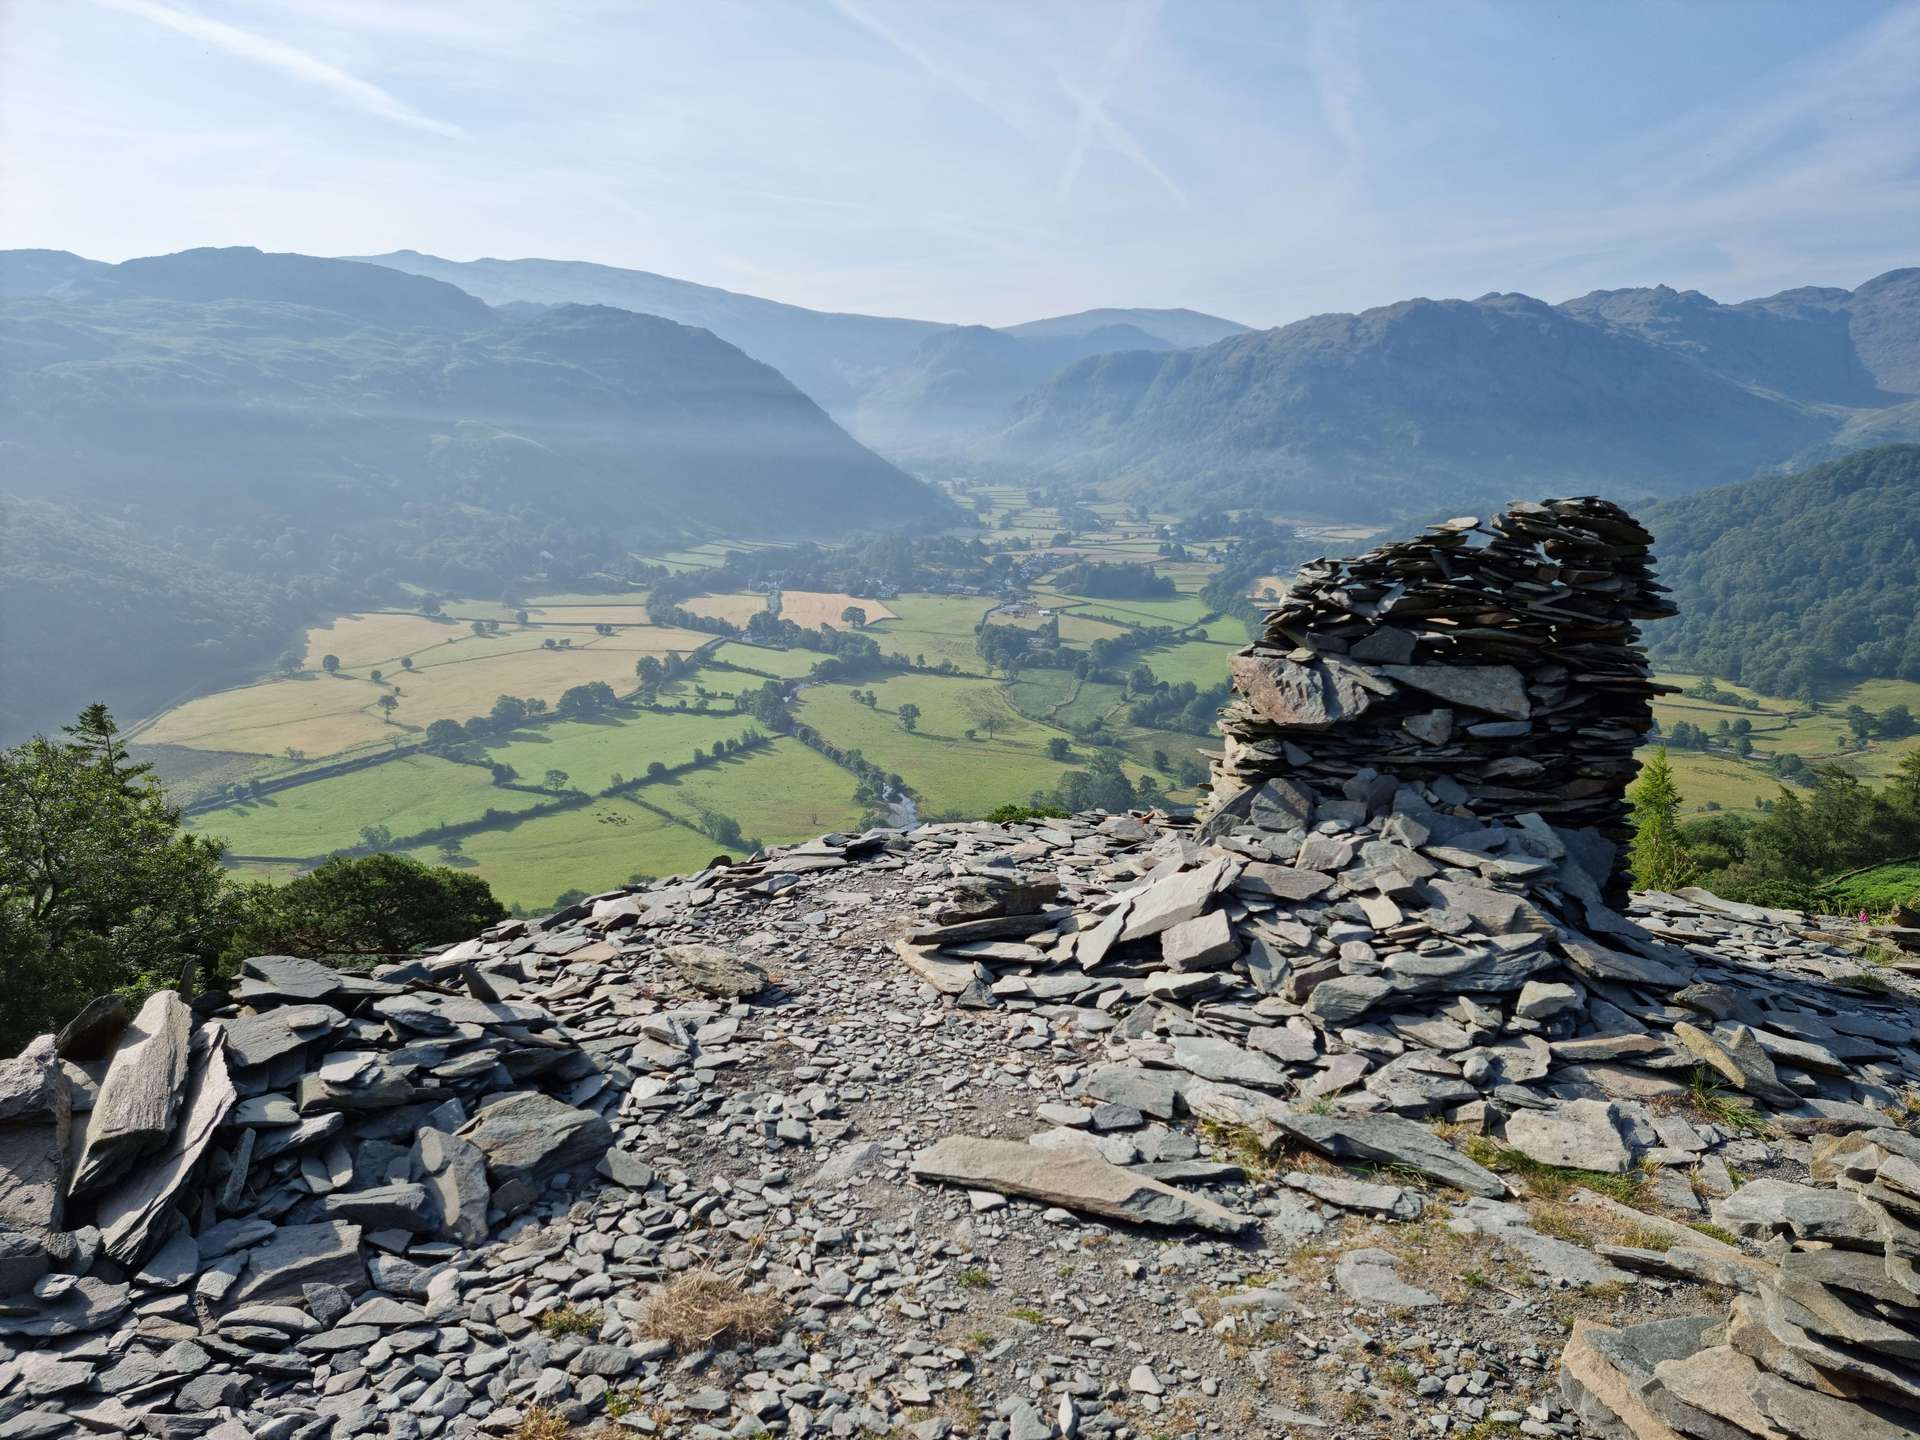 The Borrowdale Valley